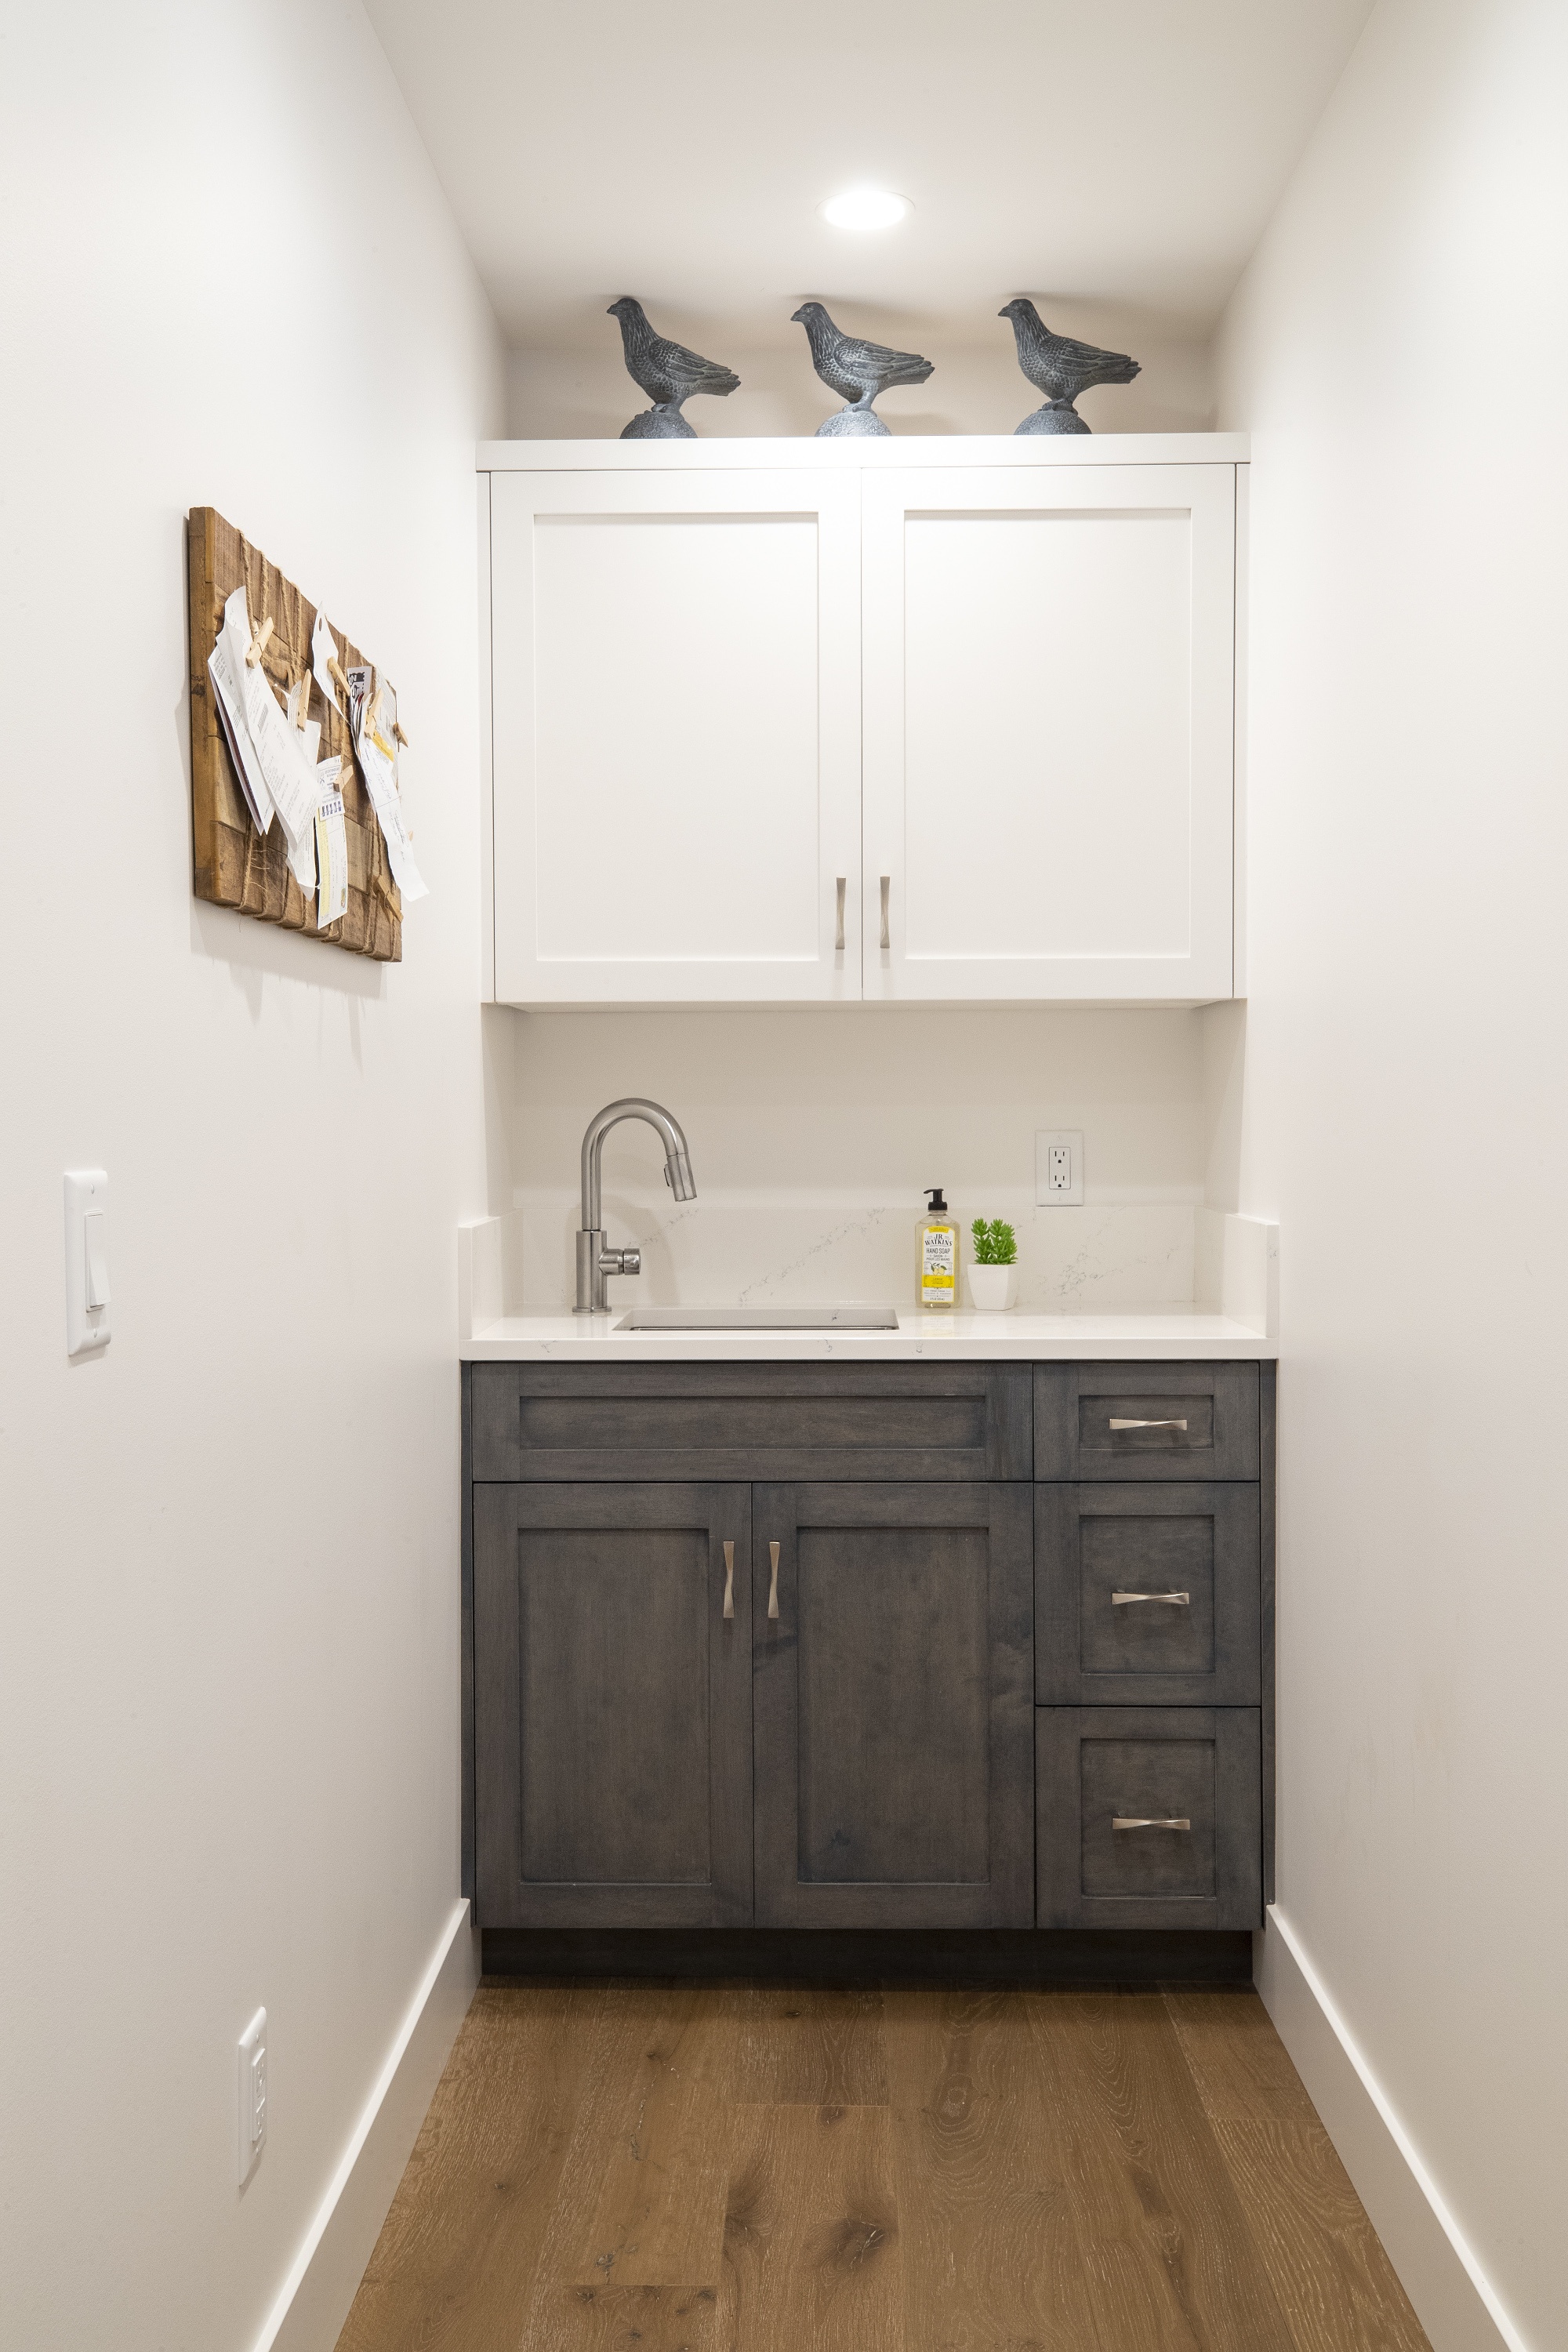 Cabinets created by Coppes